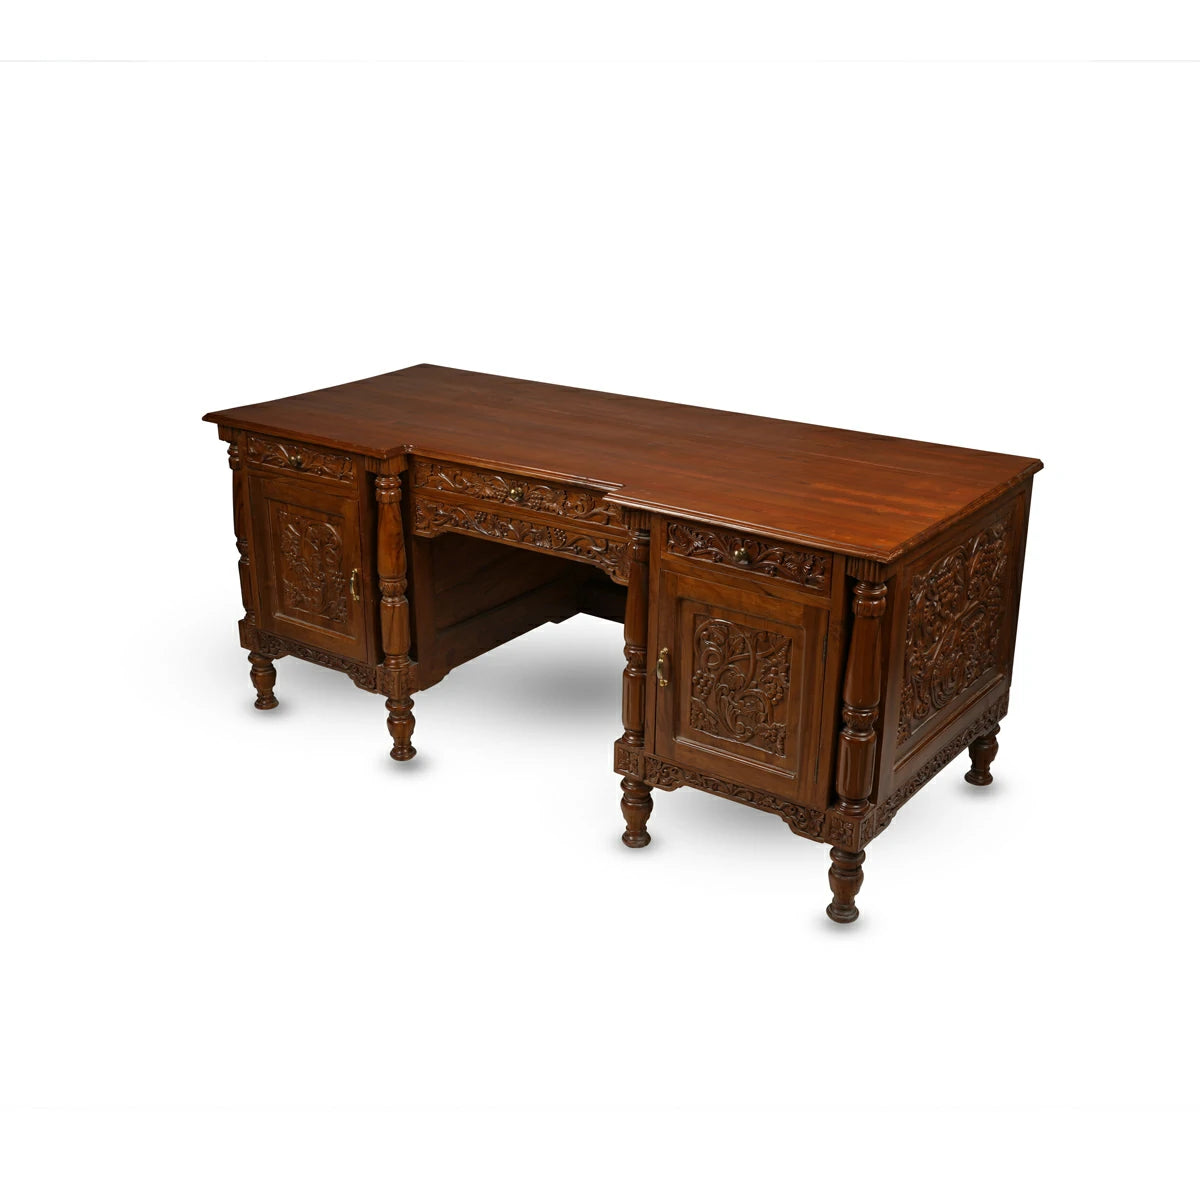 Sturdy Walnut Wood Counter Desk / Table with mesmerizing carvings & detailing's with pillared corners